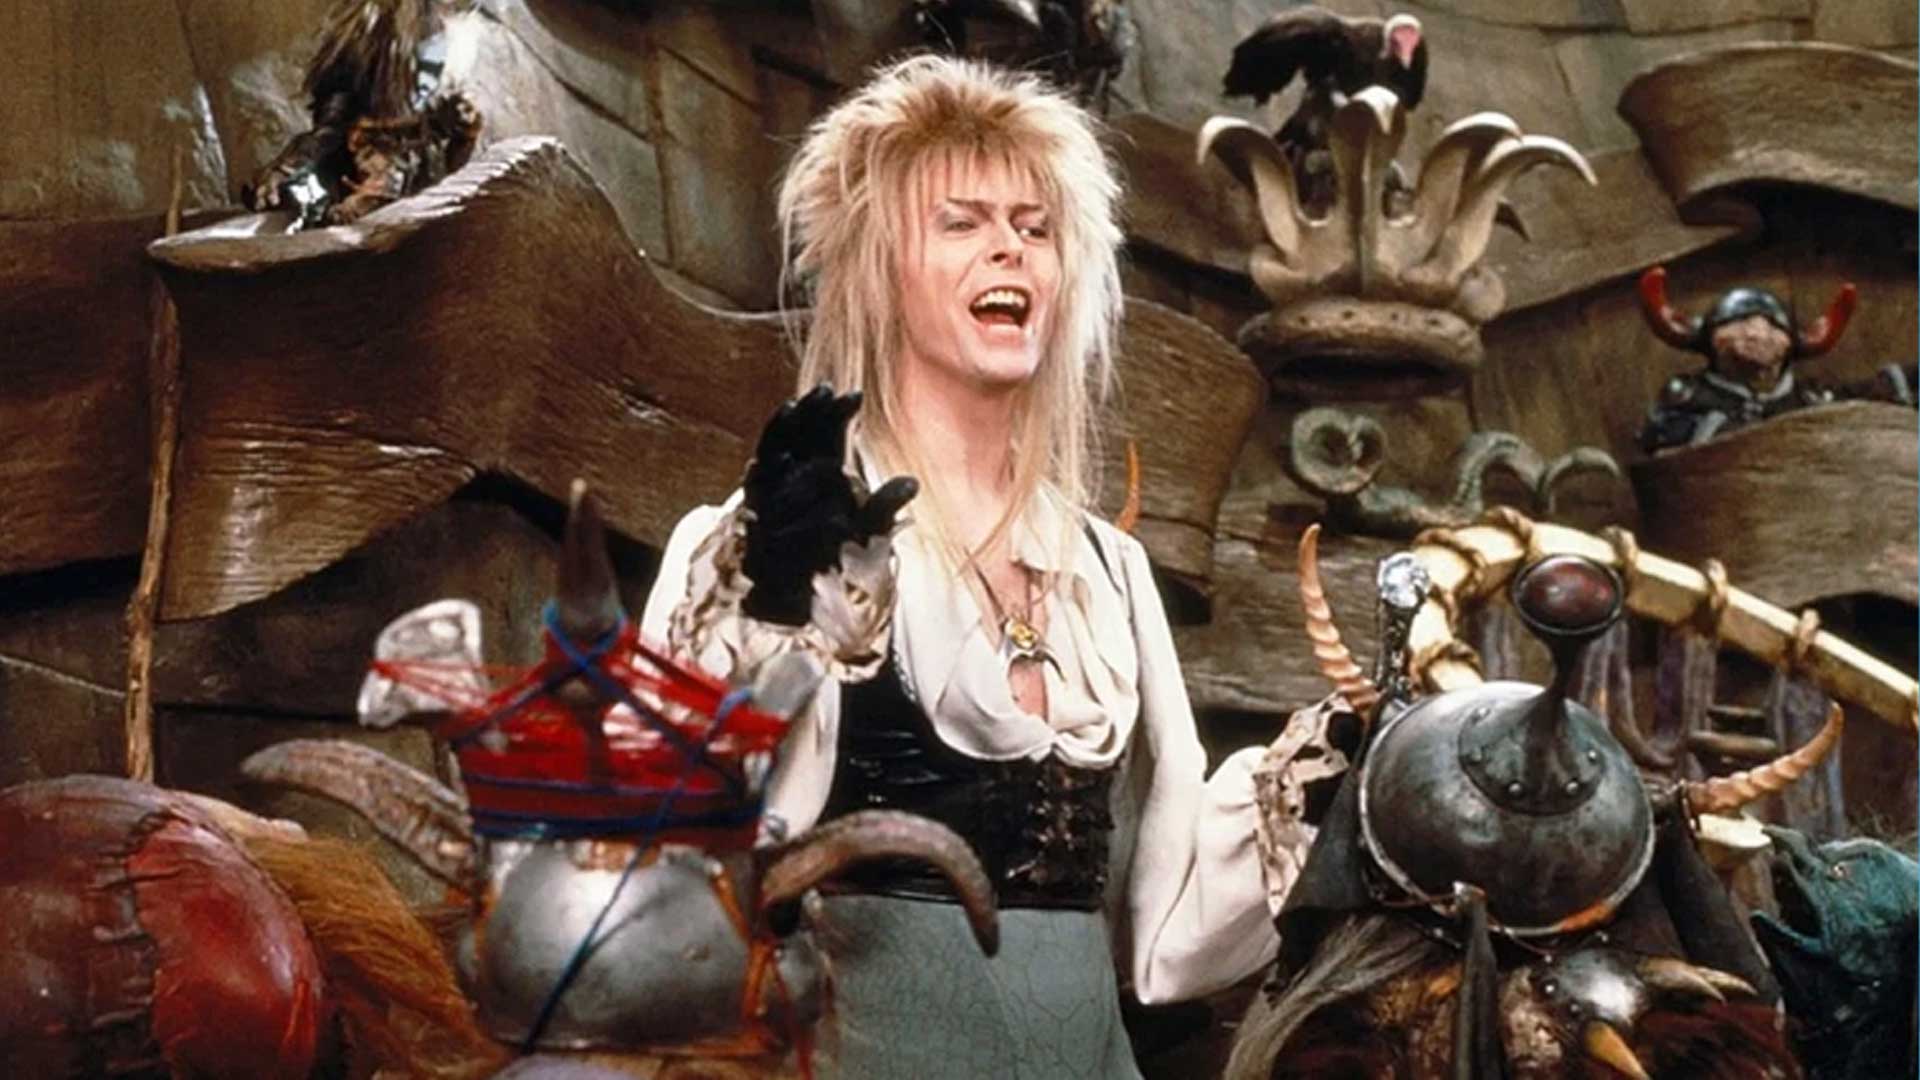 A singer-actor in Labyrinth 